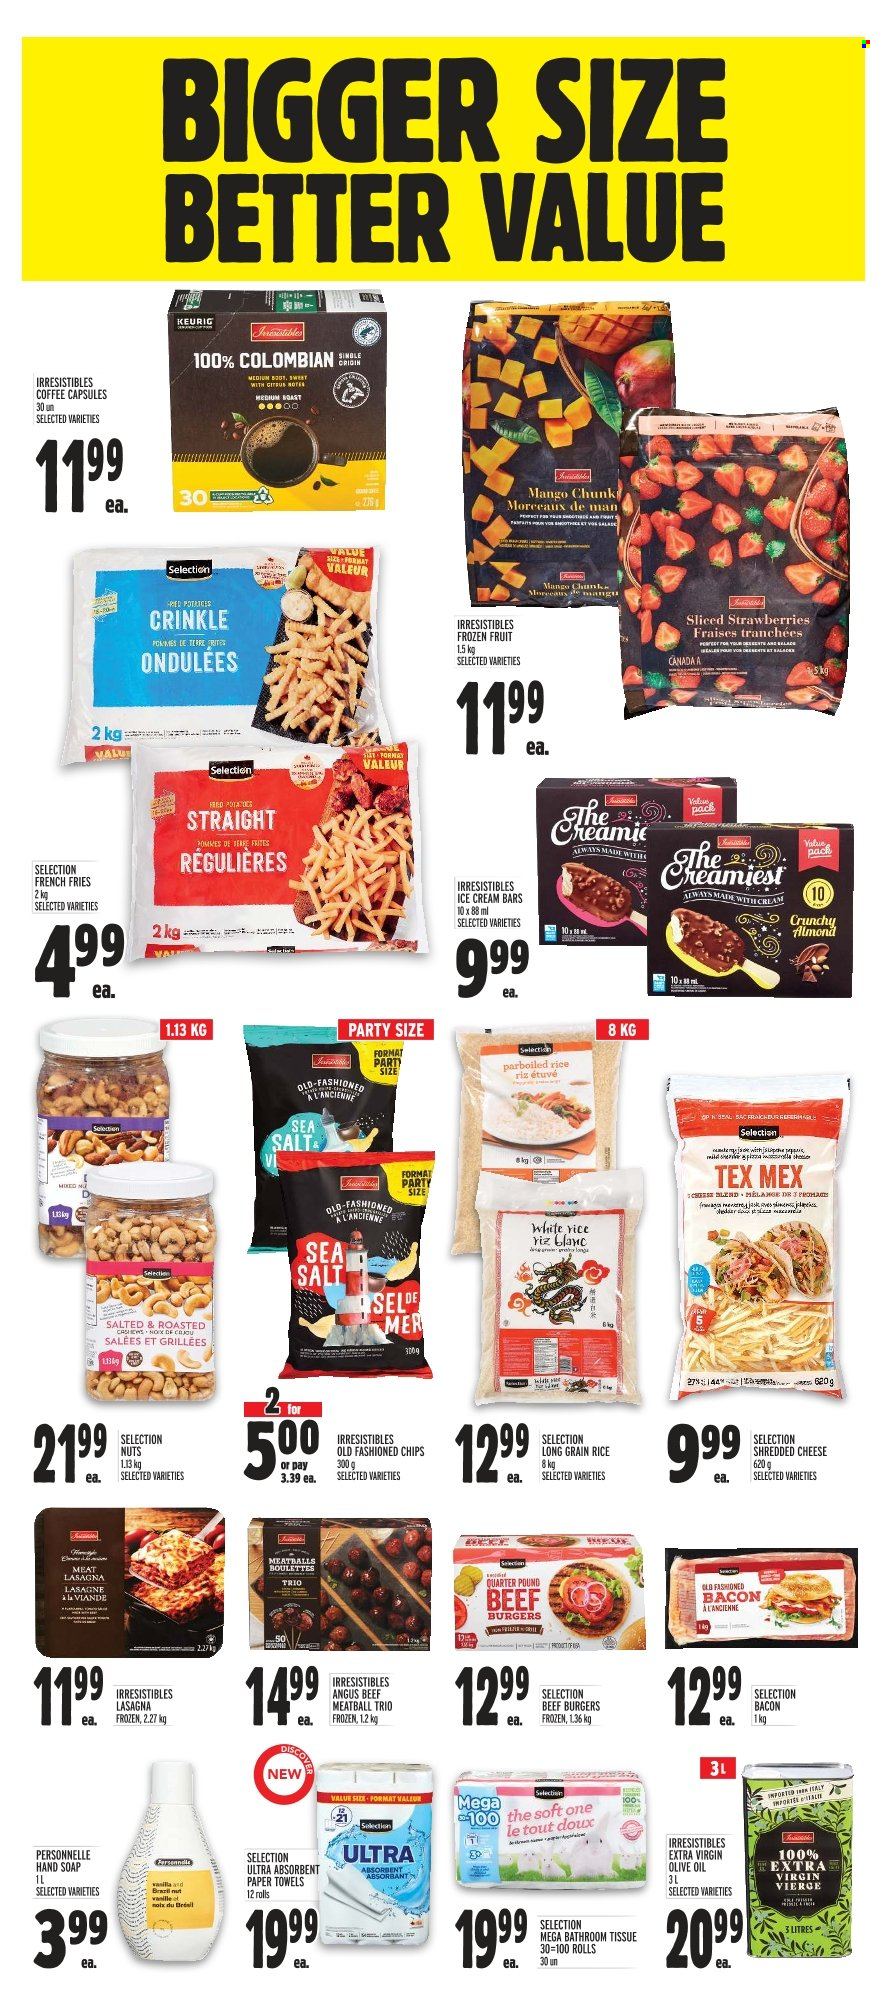 thumbnail - Metro Flyer - January 26, 2023 - February 01, 2023 - Sales products - potatoes, mango, strawberries, pizza, meatballs, hamburger, beef burger, lasagna meal, bacon, shredded cheese, ice cream, ice cream bars, potato fries, french fries, rice, white rice, parboiled rice, long grain rice, extra virgin olive oil, olive oil, coffee, coffee capsules, Keurig, beef meat, bath tissue, kitchen towels, paper towels, hand soap, soap. Page 9.